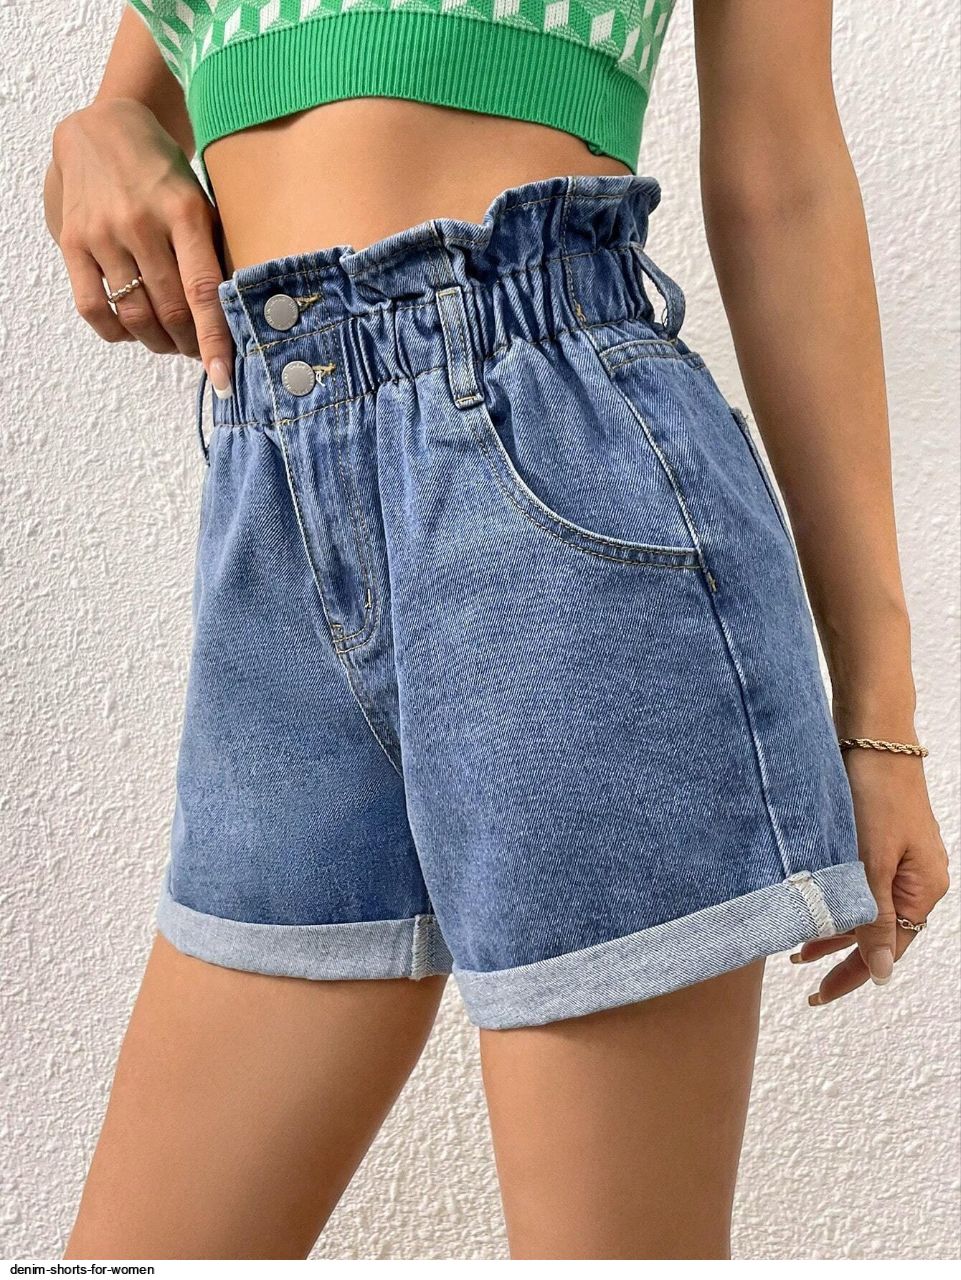 Buy JASAMBAC Women's High Waisted Denim Shorts Rolled Hem Wide Leg Casual Jean  Shorts with Pockets, #2blue, Small at Amazon.in